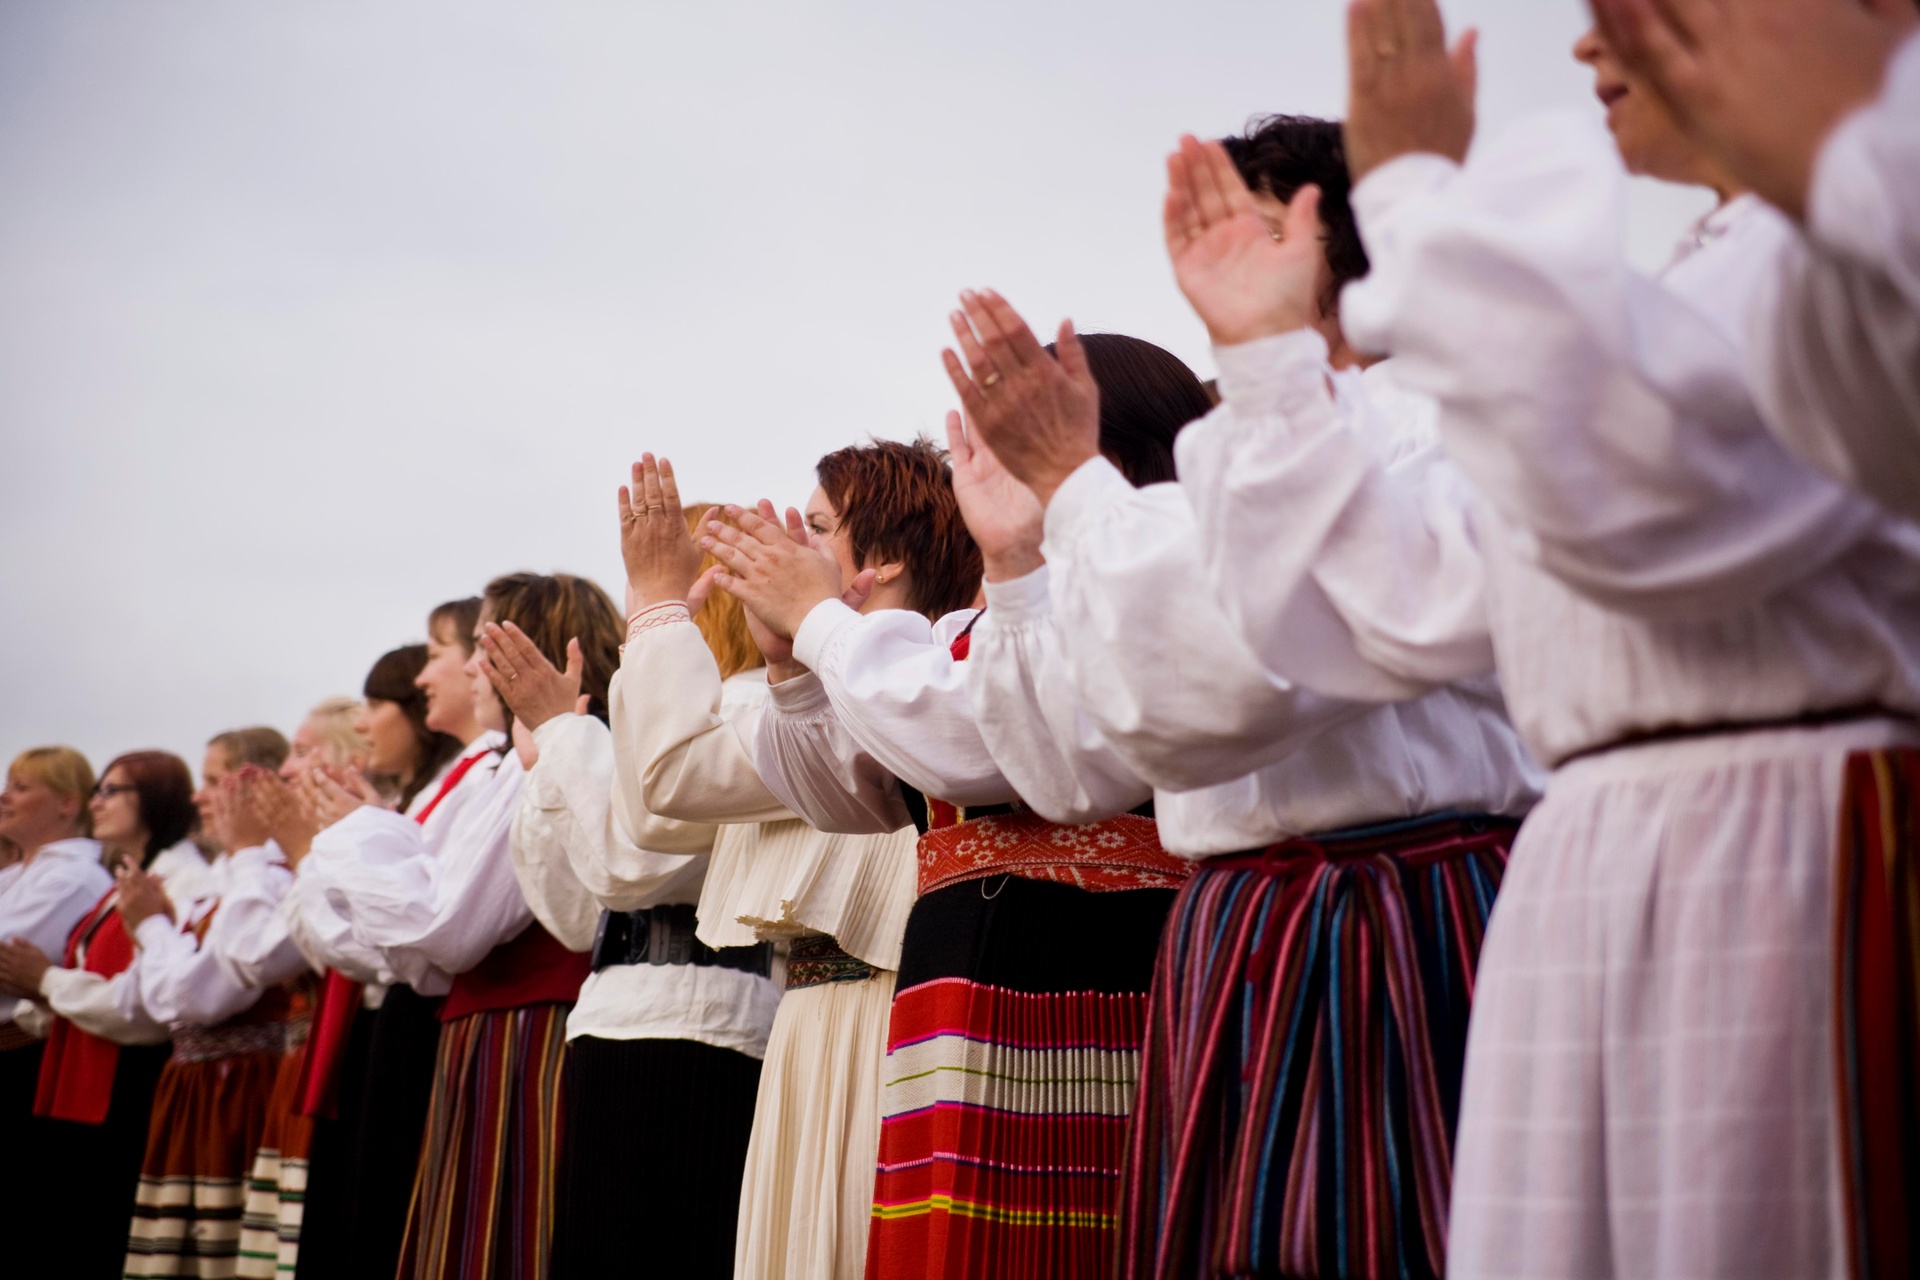 Women in traditional Estonian dress at the Song Festival